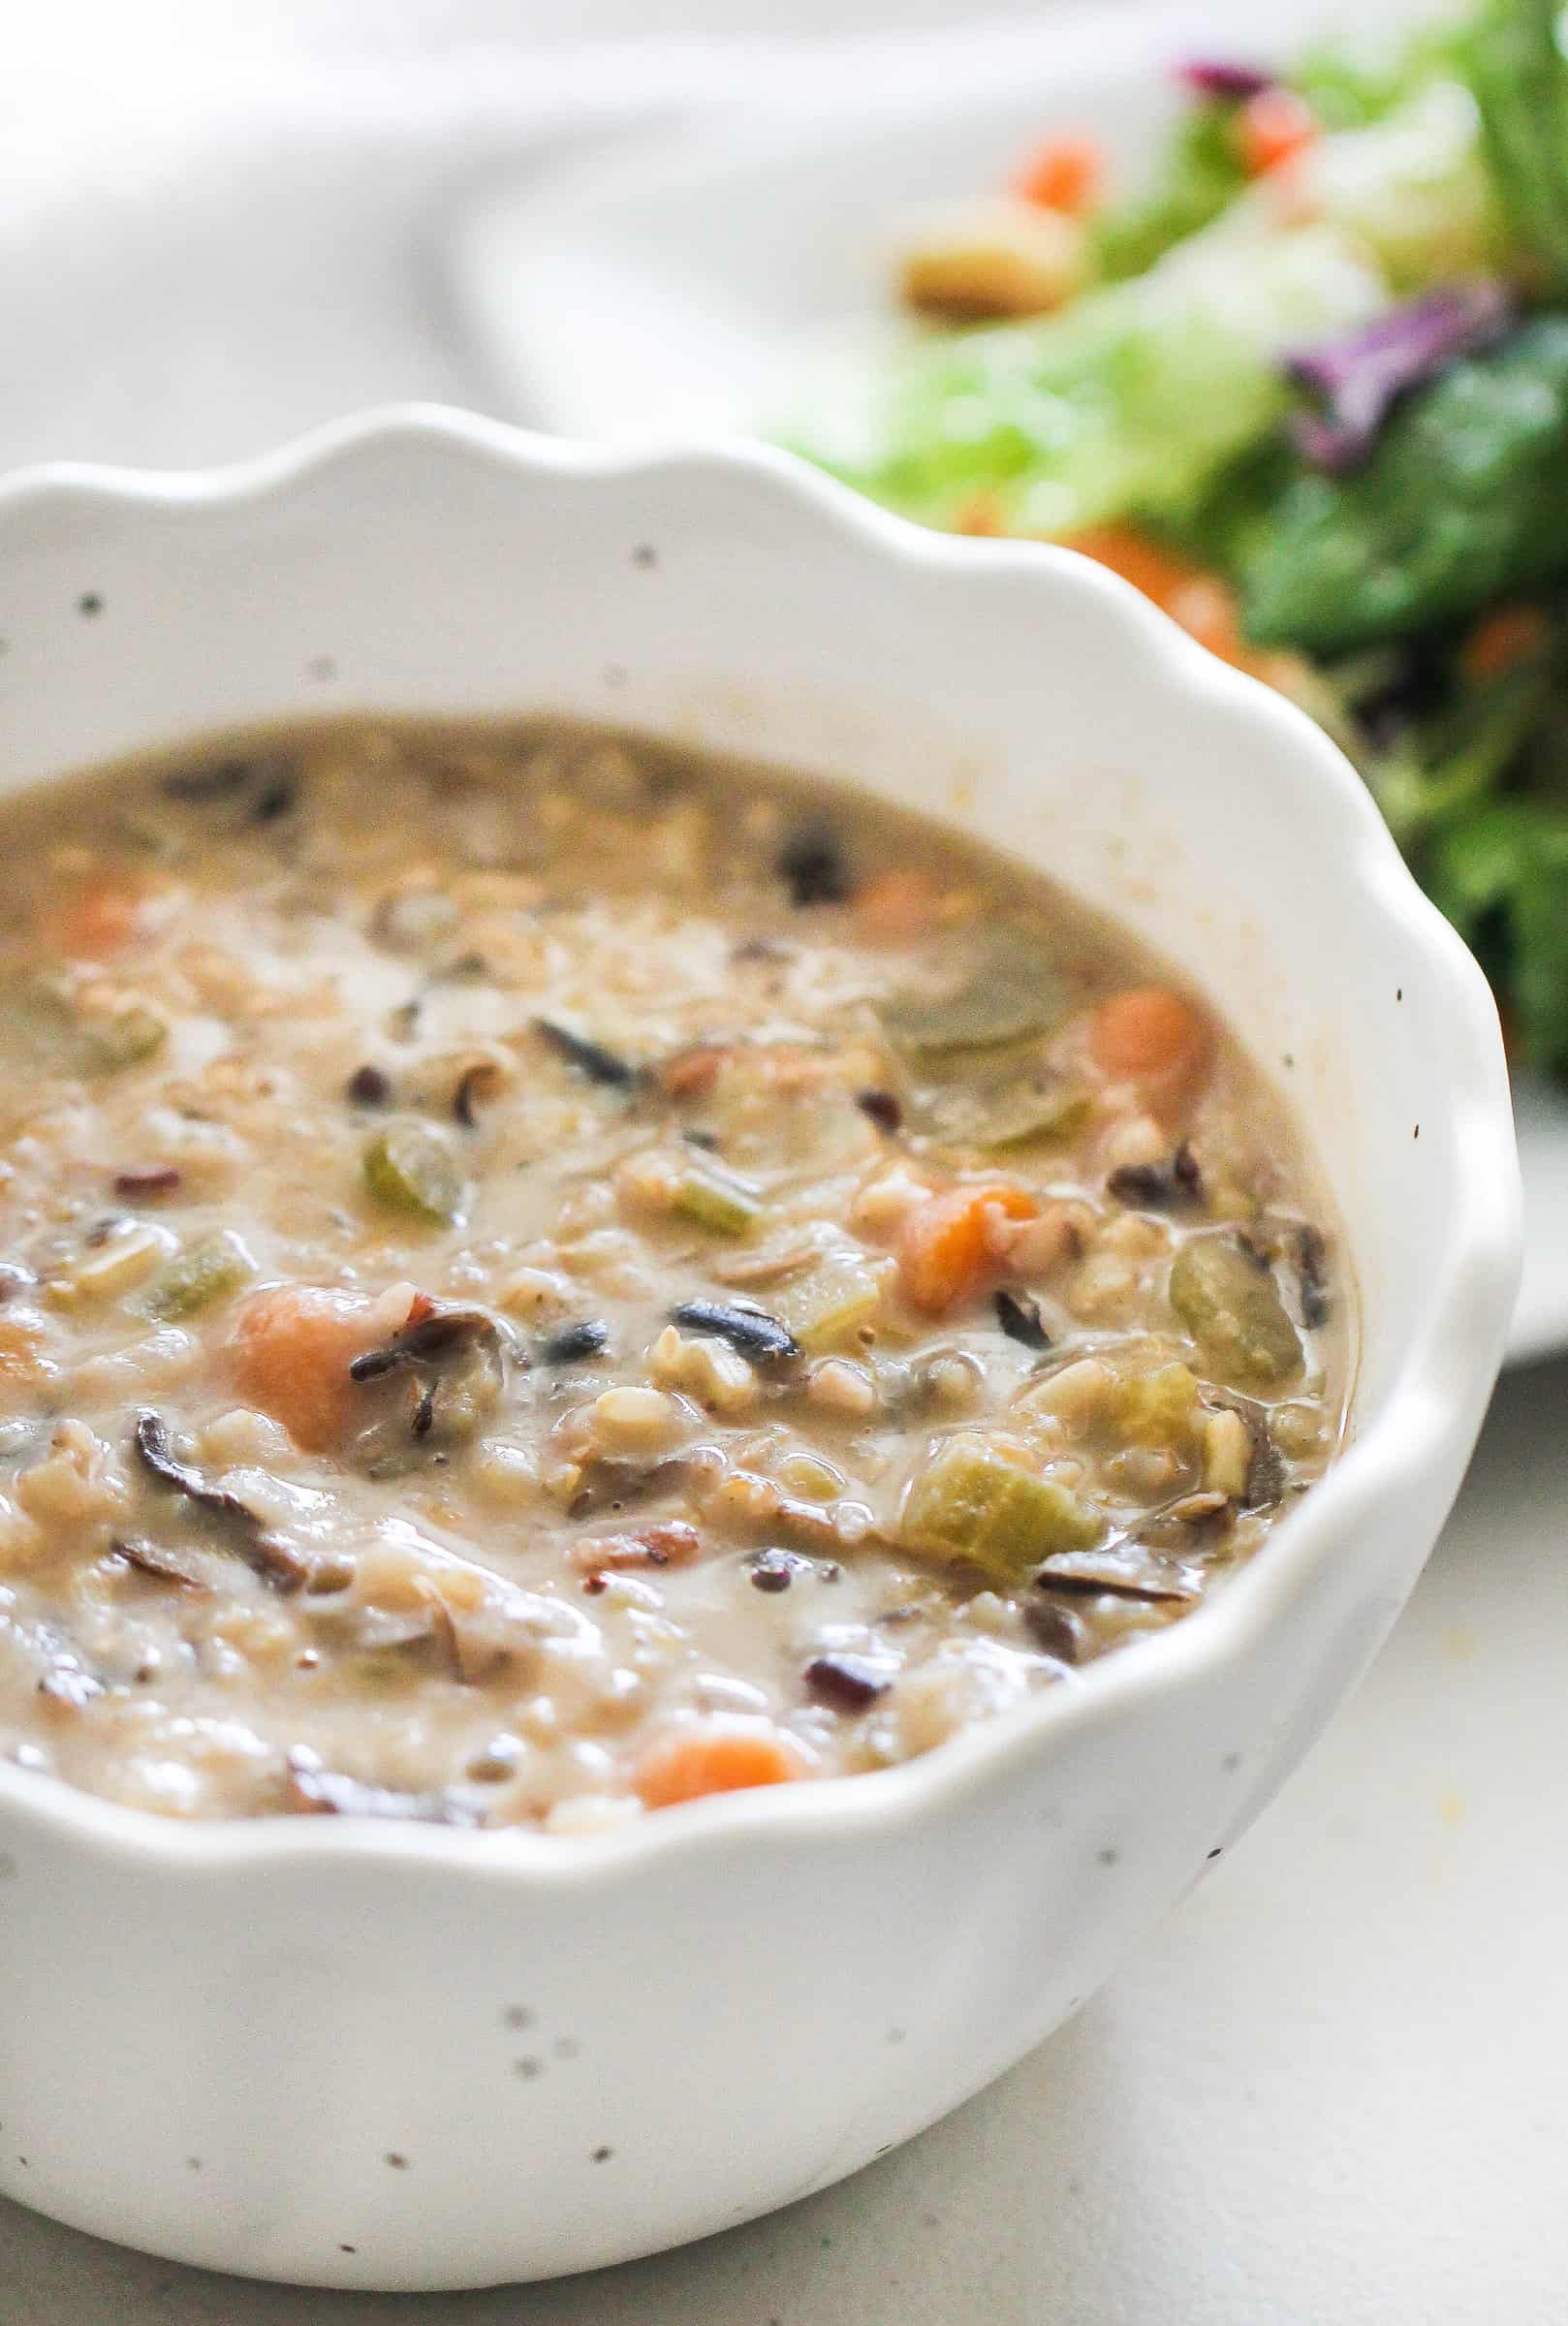 Best Instant Pot Creamy Chicken and Wild Rice Soup Recipe - How to